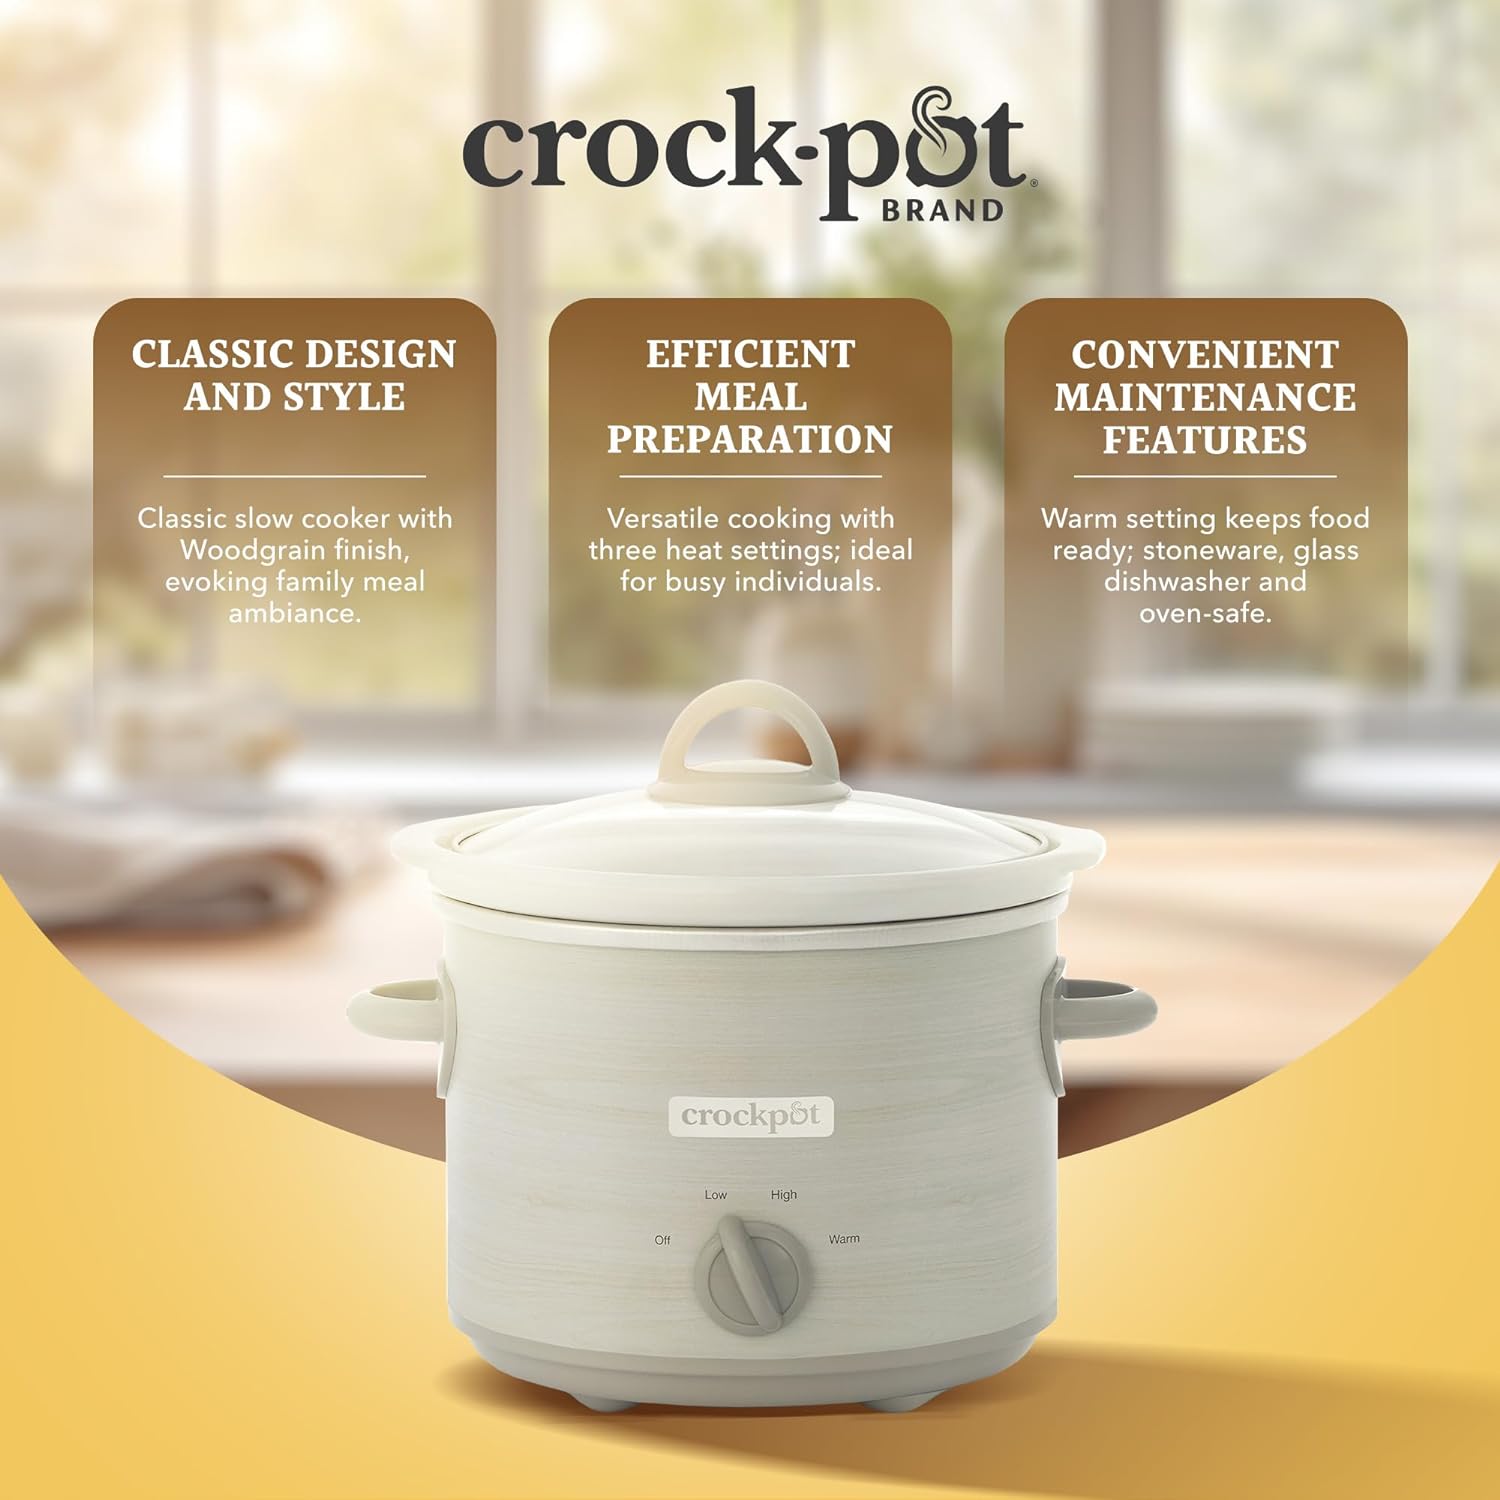 Crock-Pot Manual Design Series 3 Quart Slow Cooker with 3 Cook Settings, Removable Dishwasher and Oven Friendly Stoneware for Meal Prep, Woodgrain